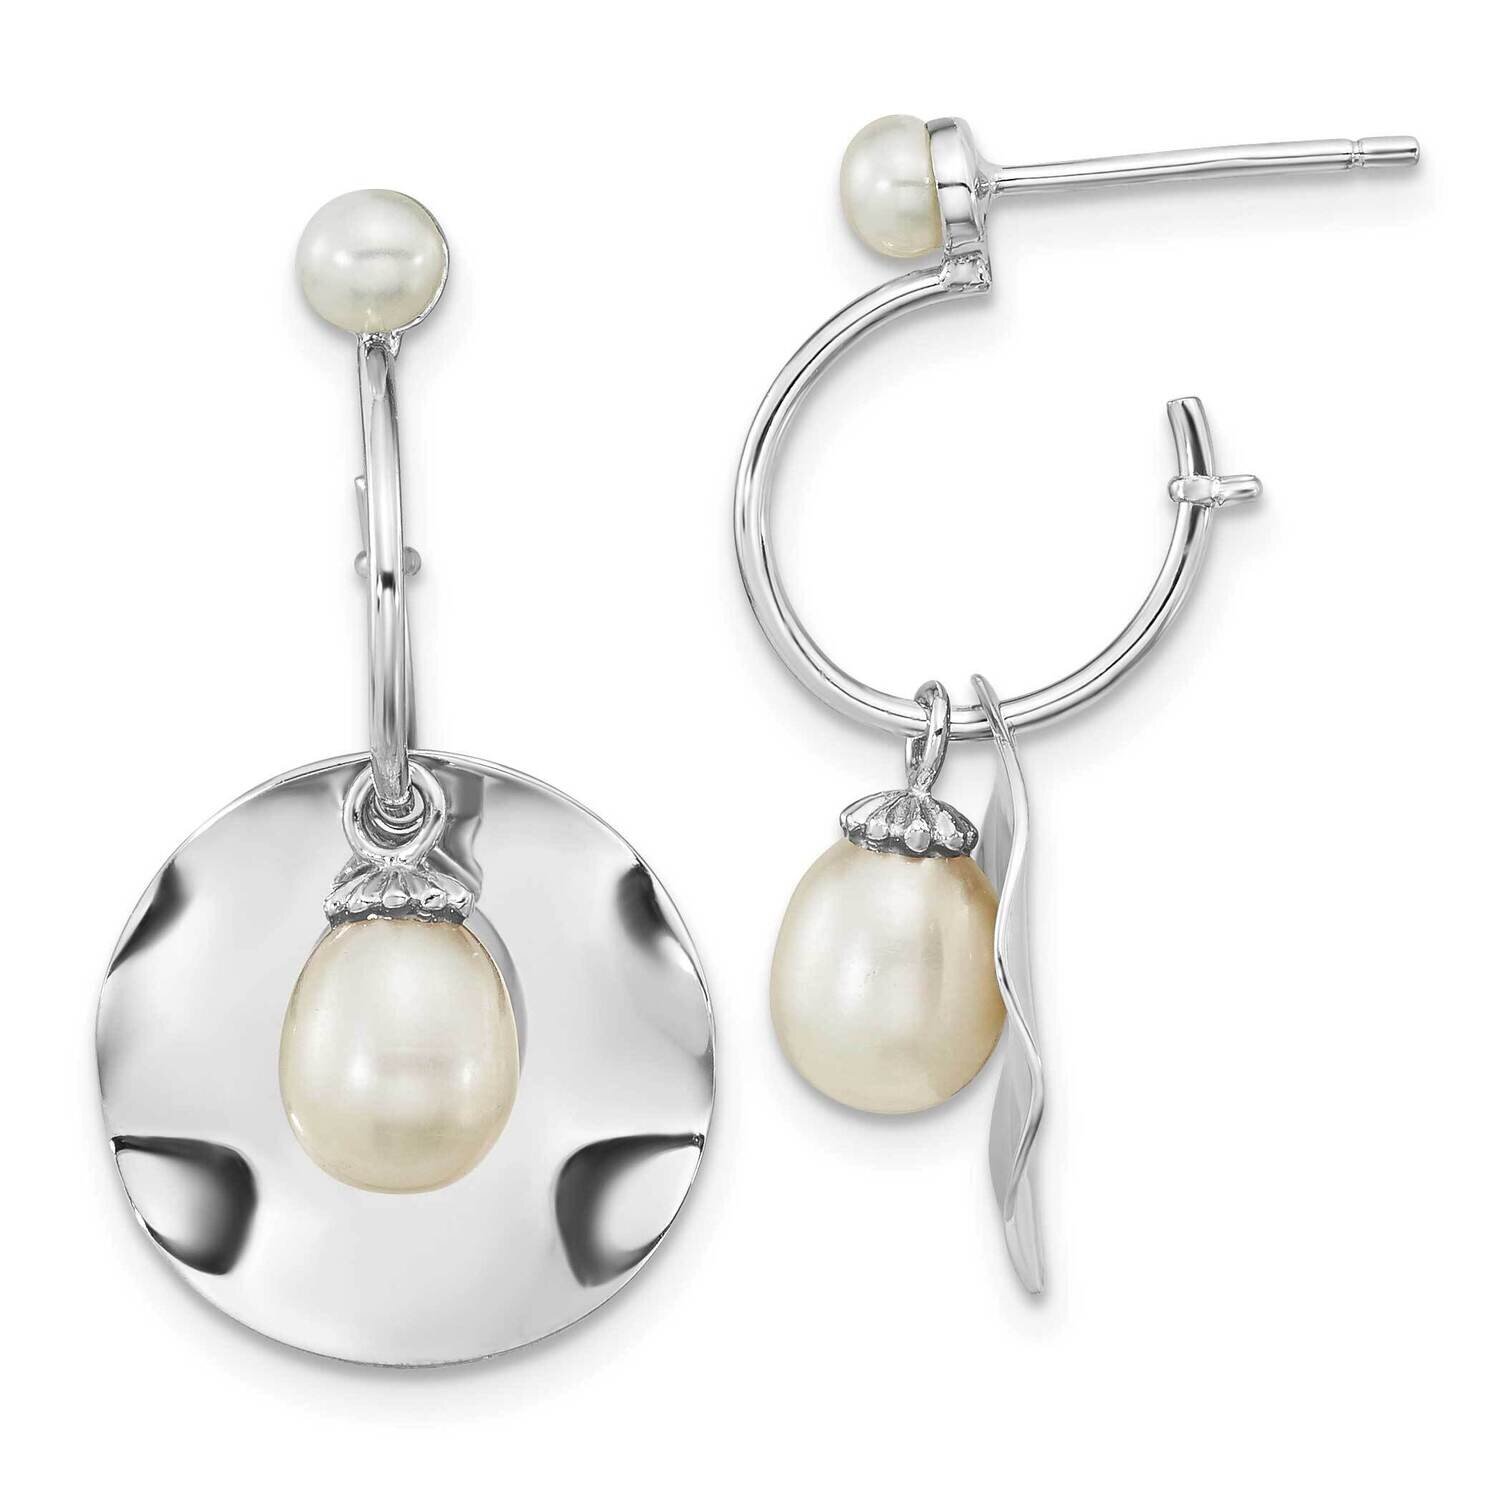 3-6mm White Rice Fwc Pearl Dangle Earrings Sterling Silver Rhodium-Plated QE16367